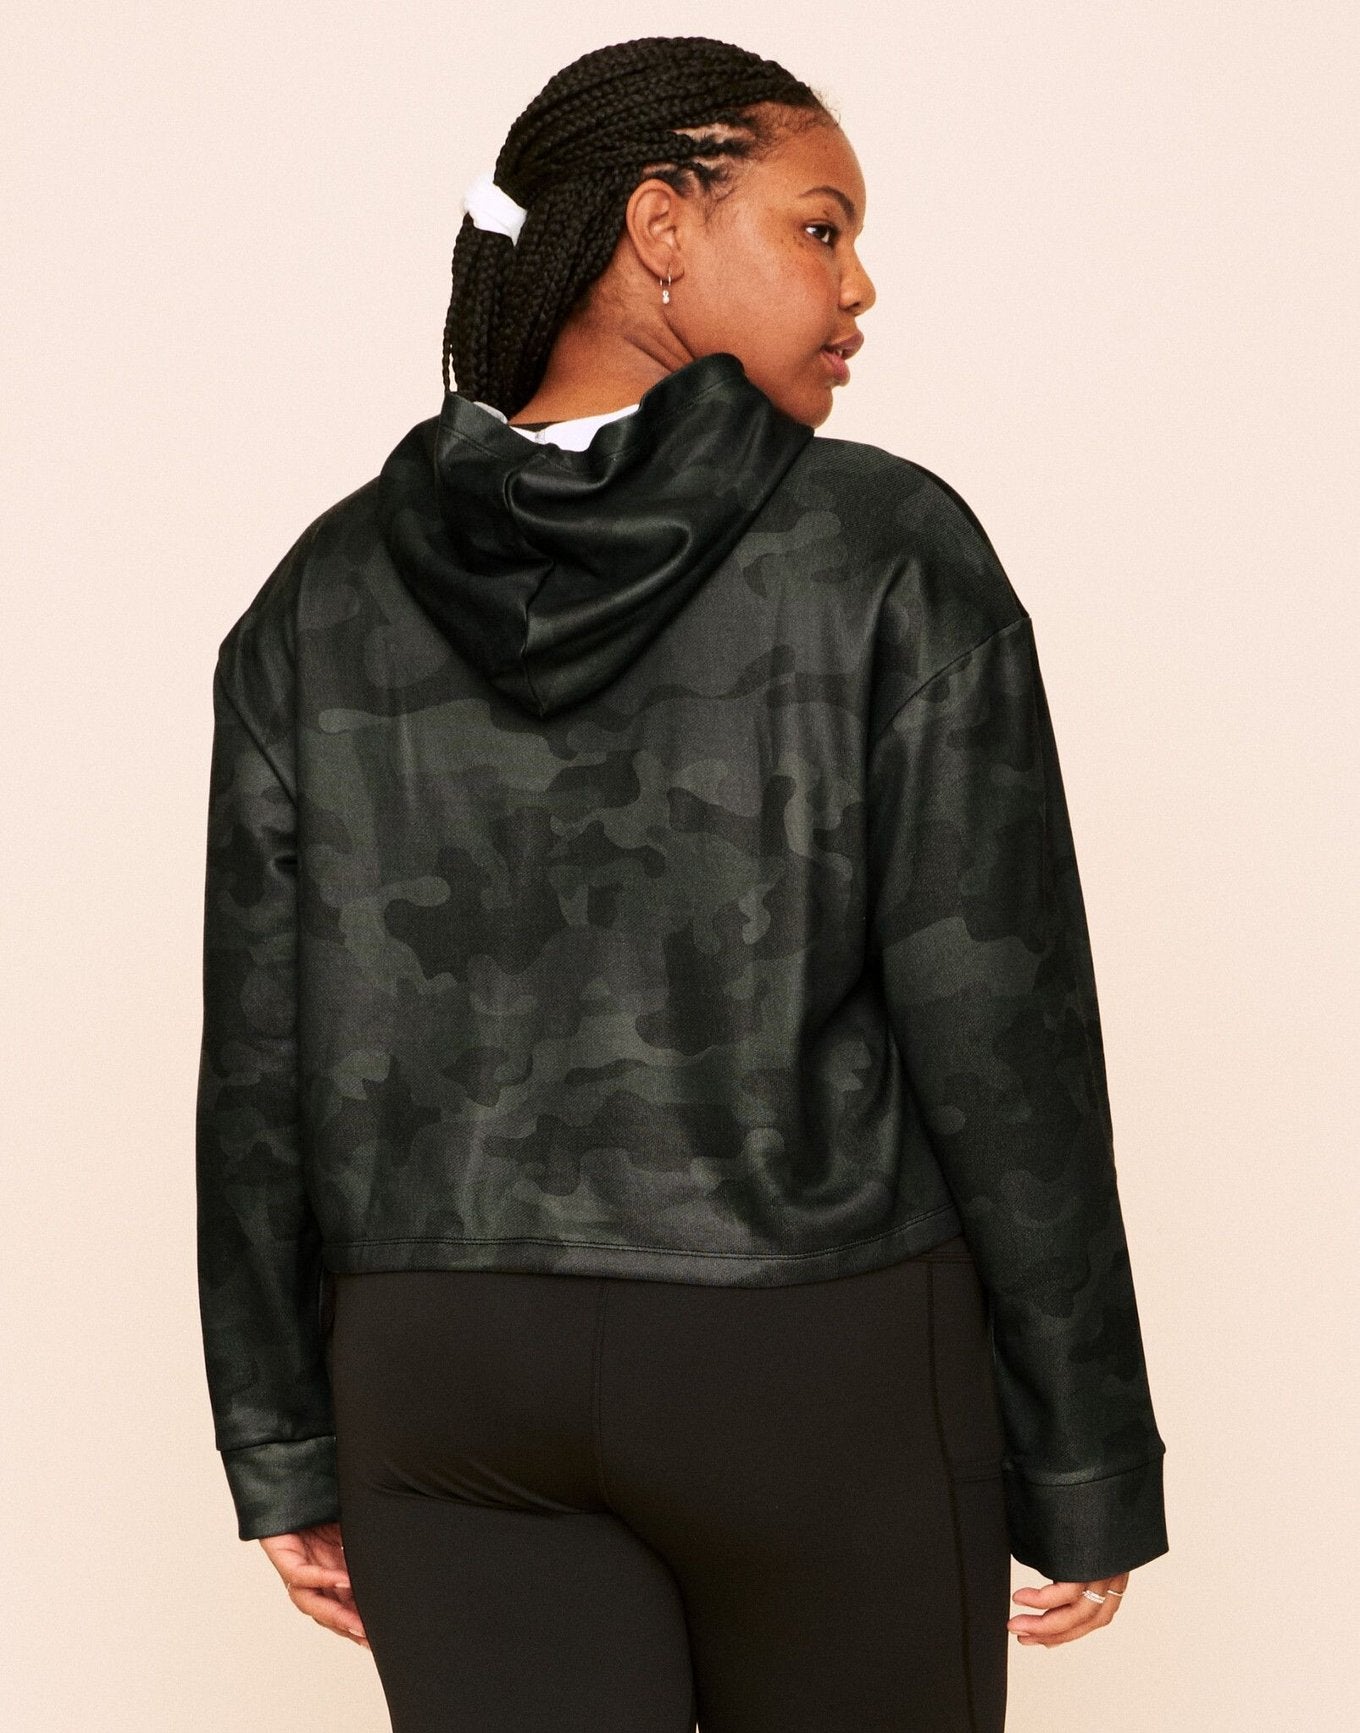 Earth Republic Myah Escape Luxe Hoodie Cropped Hoodie in color Dark Camo and shape hoodie